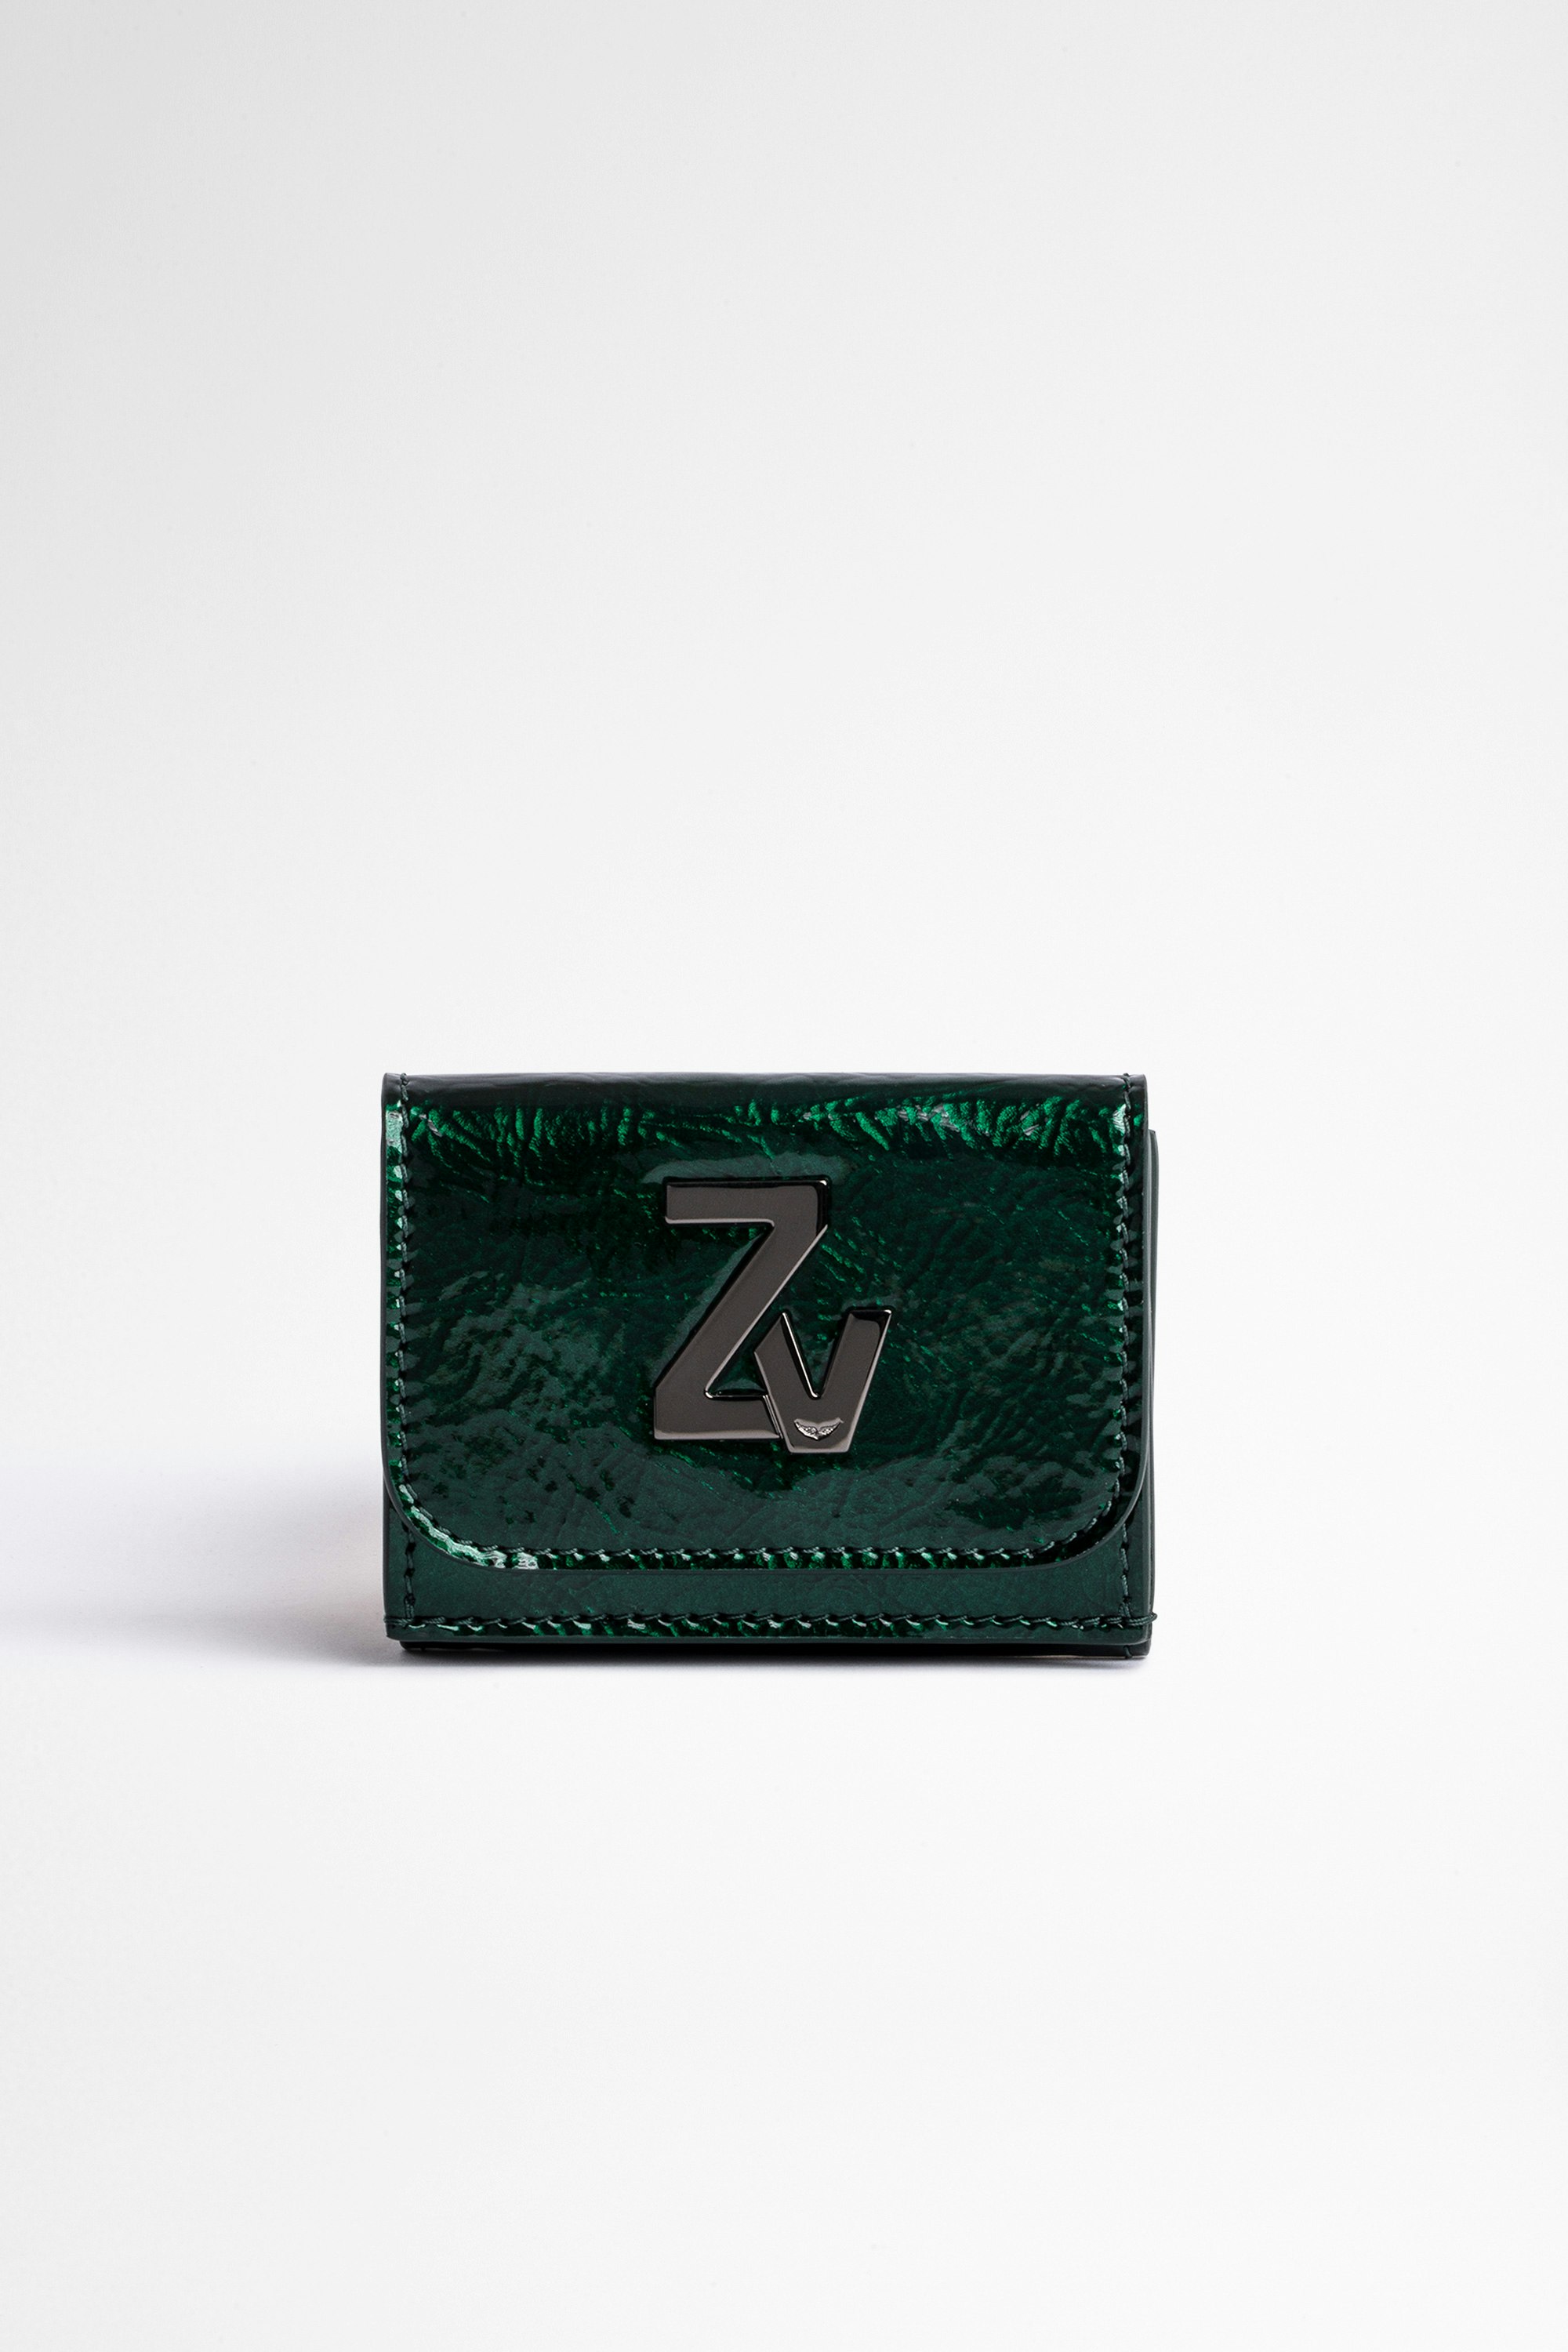 ZV Initiale Le Trifold Wallet